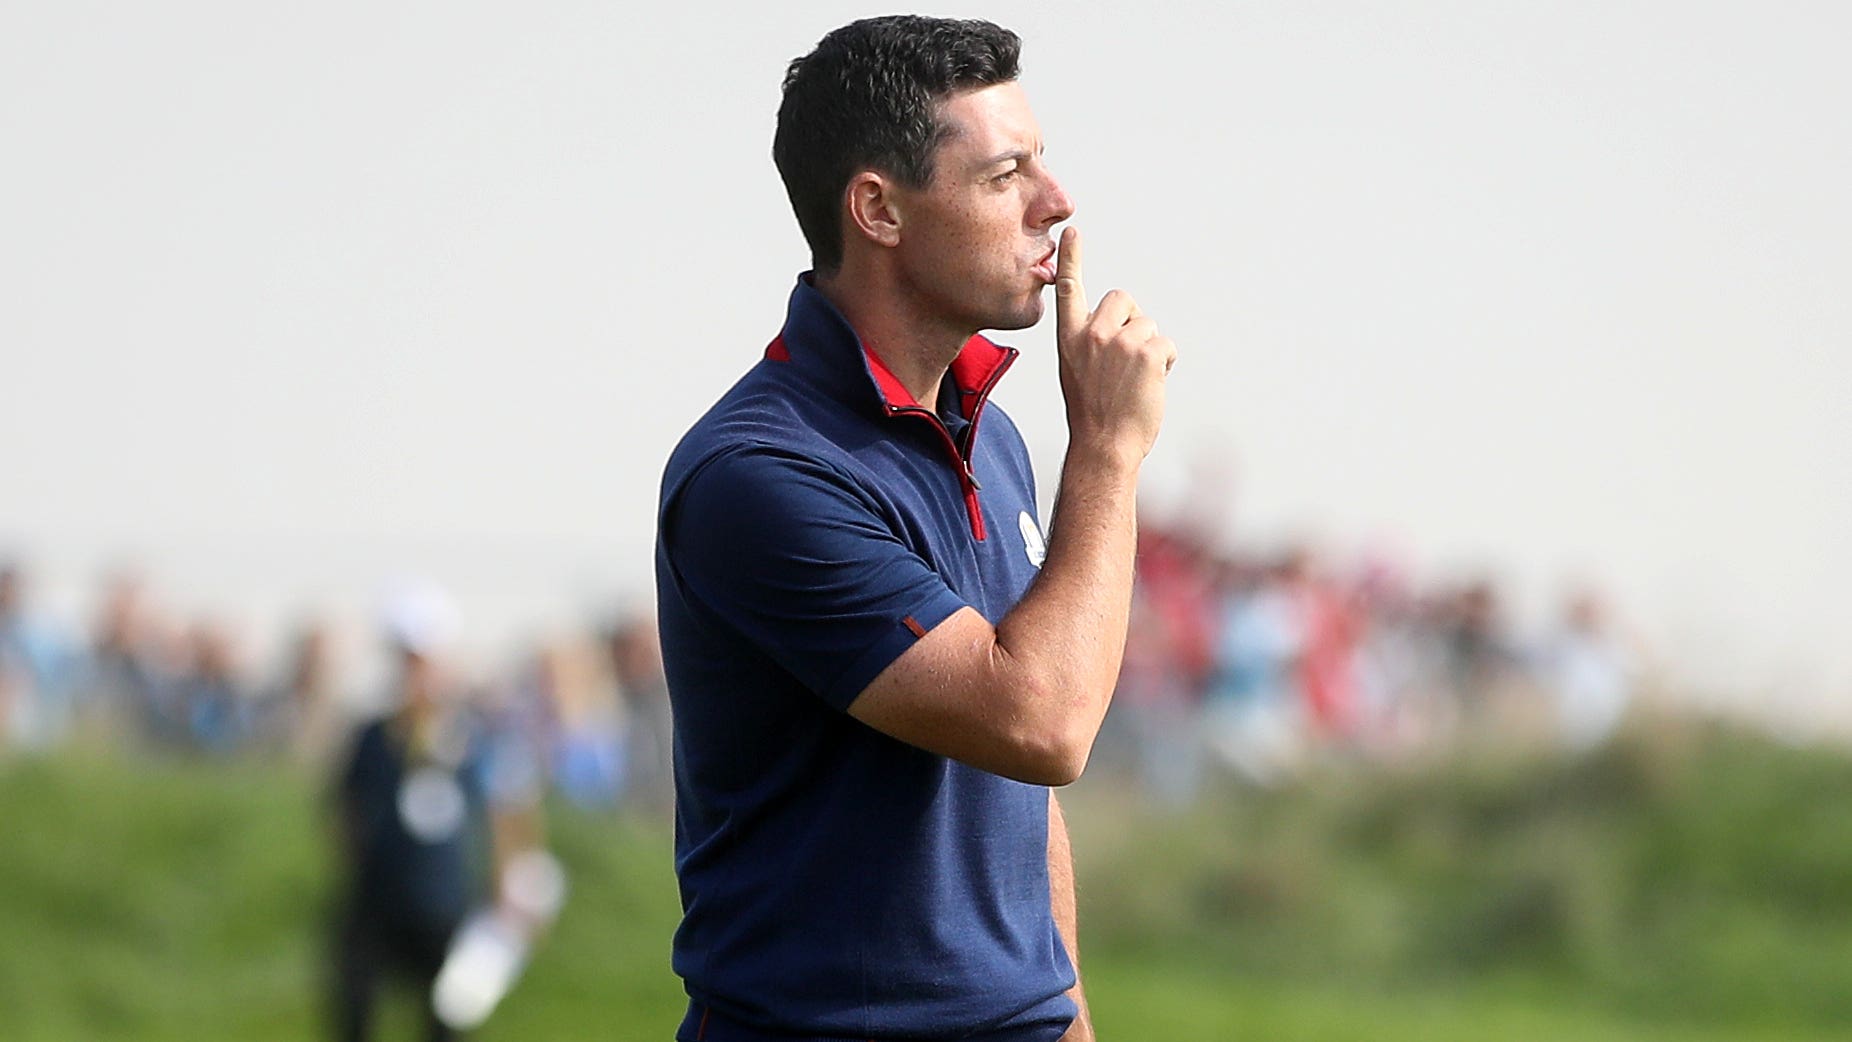 Rory McIlroy returned to form in the afternoon in Paris